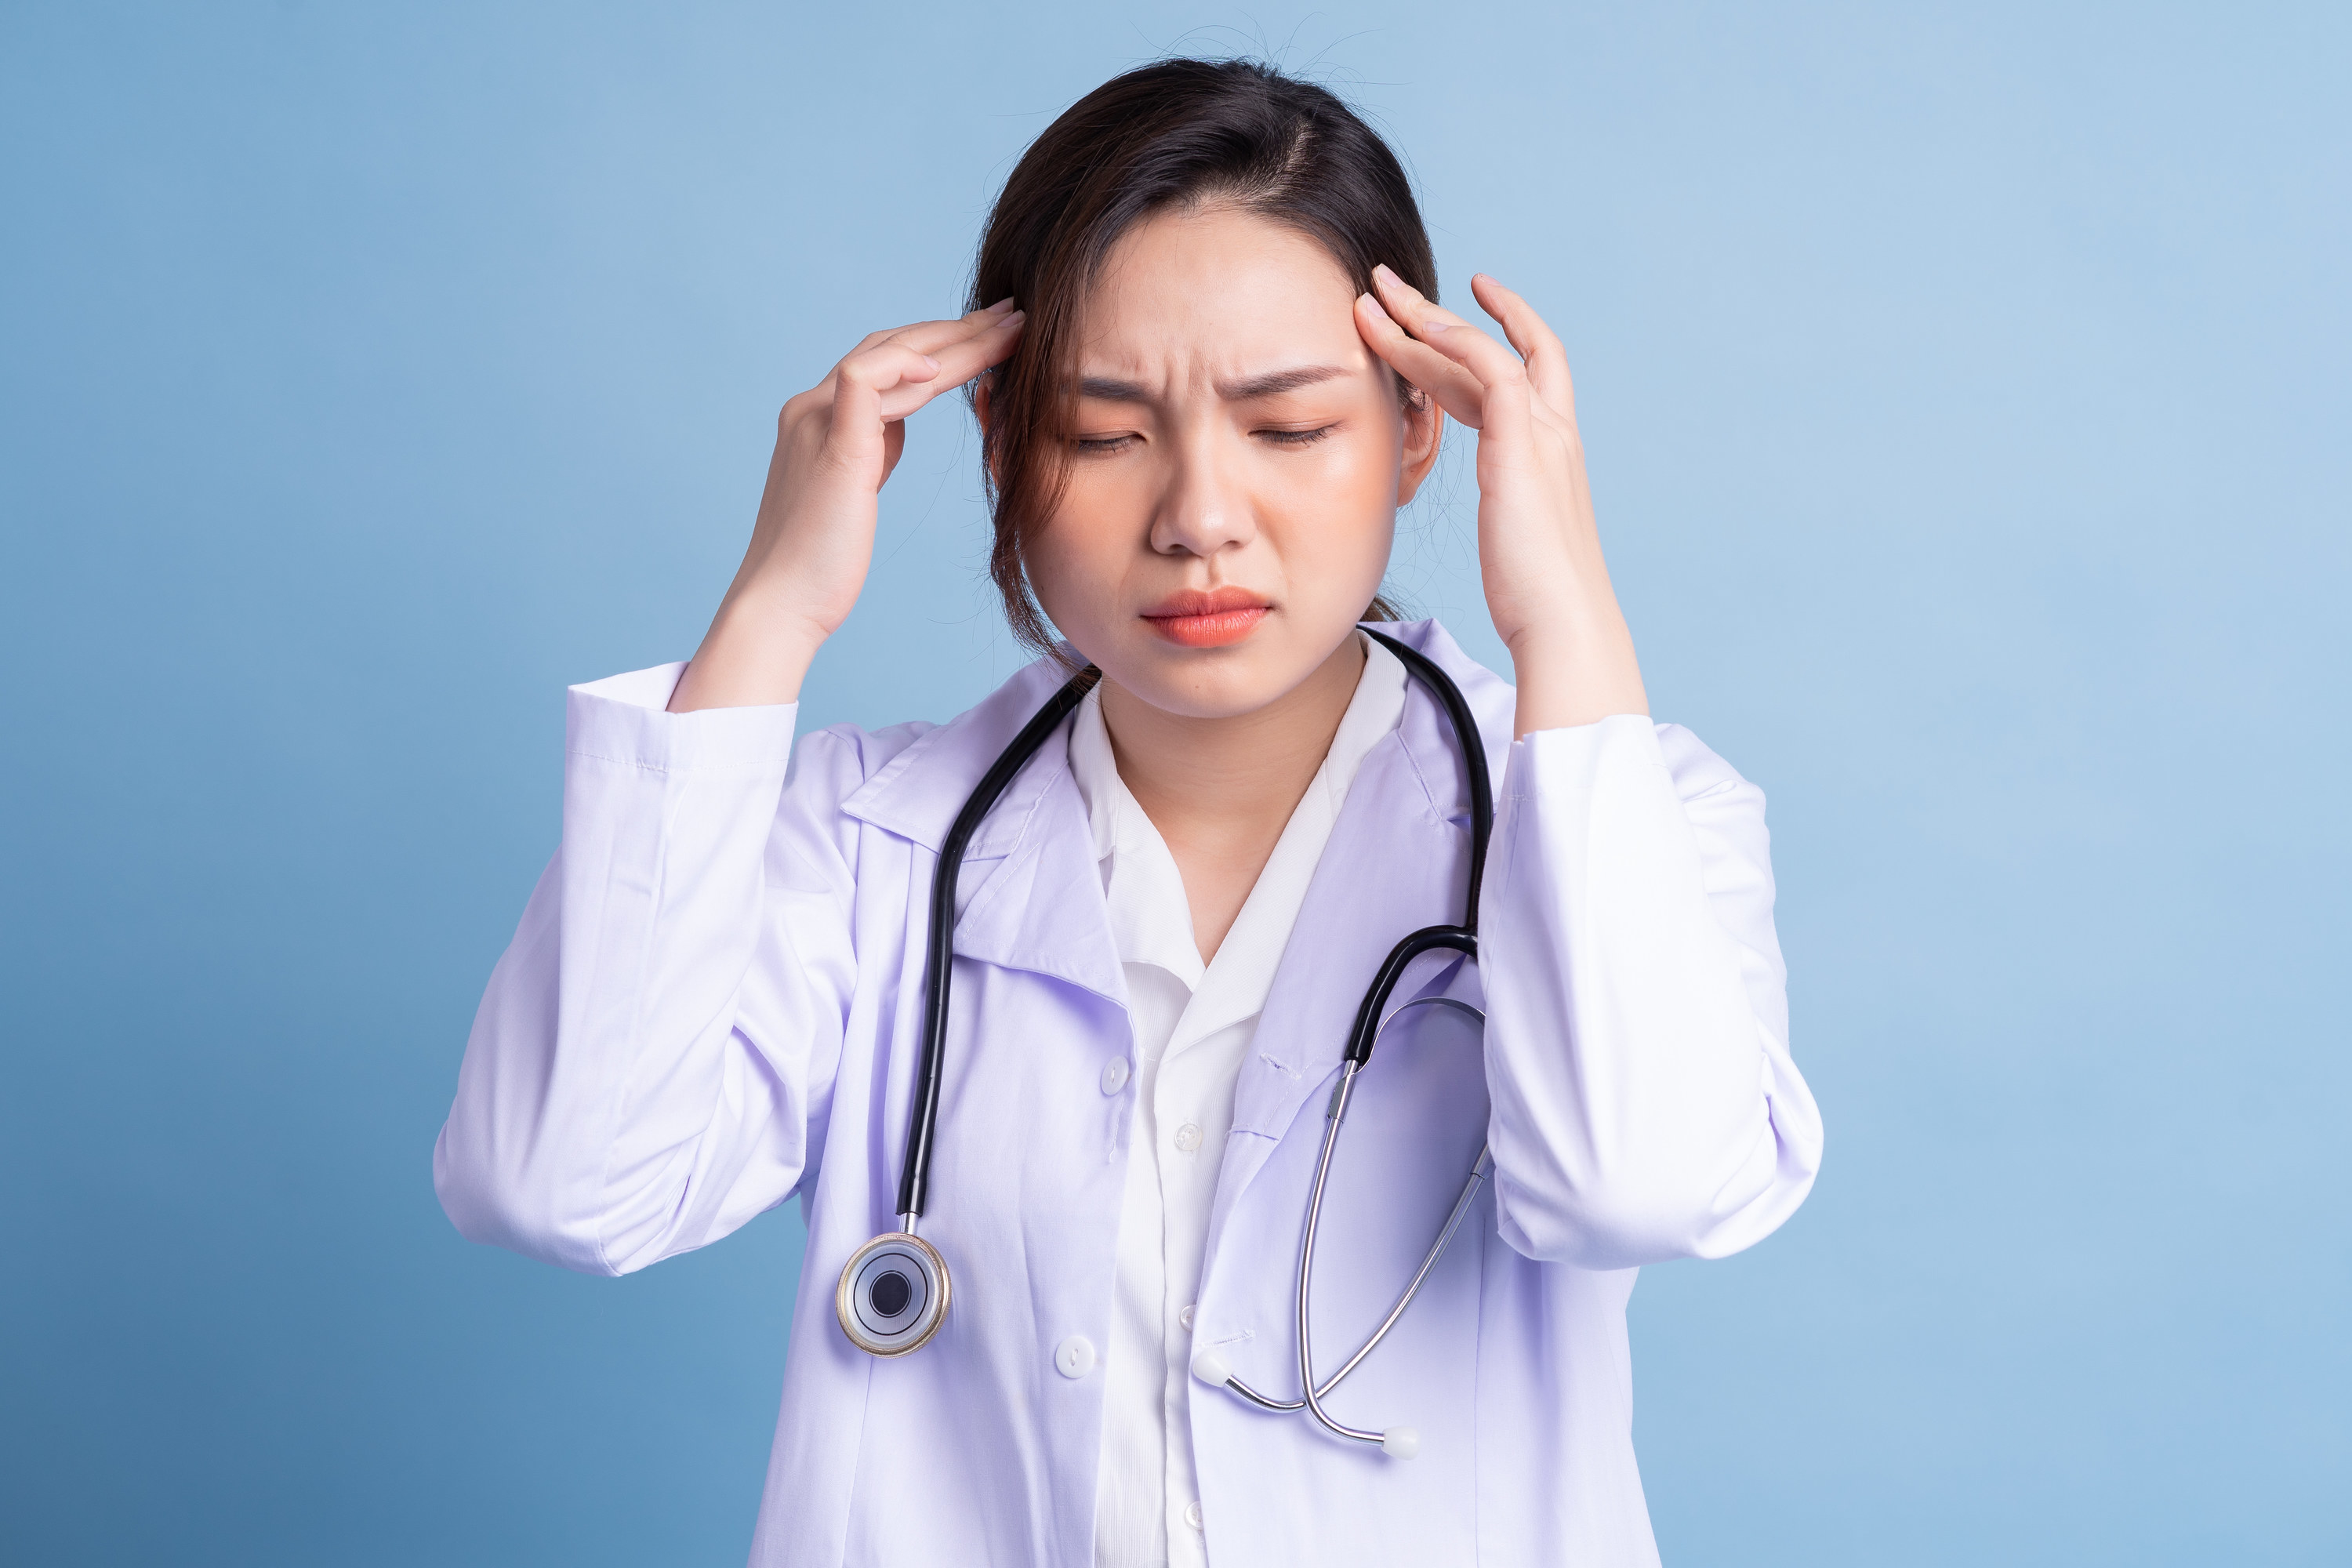 Frustrated doctor holding her head